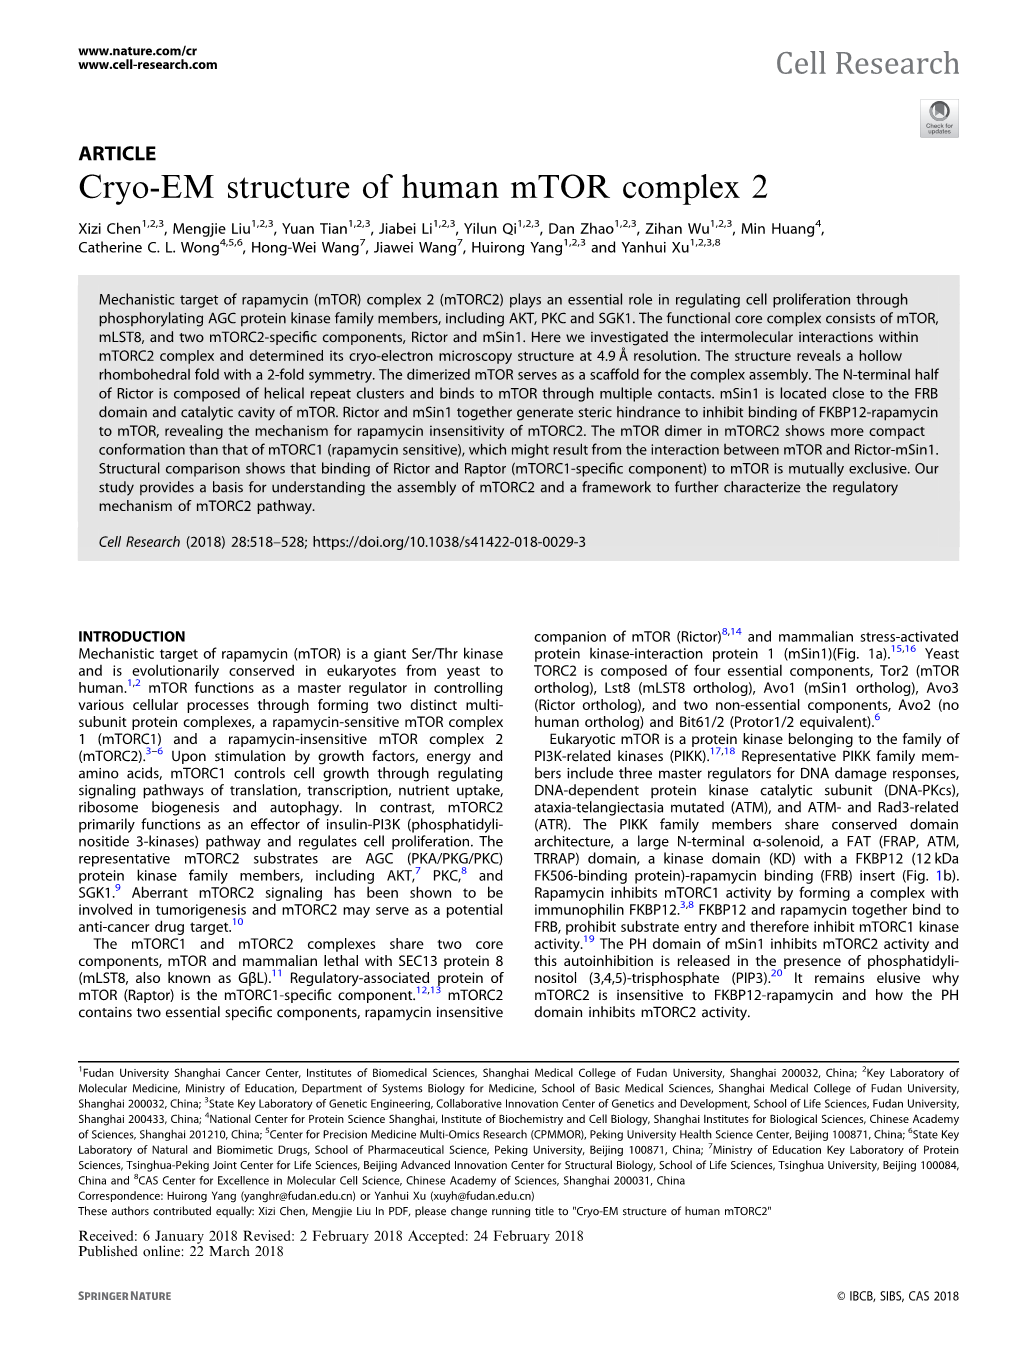 Cryo-EM Structure of Human Mtor Complex 2